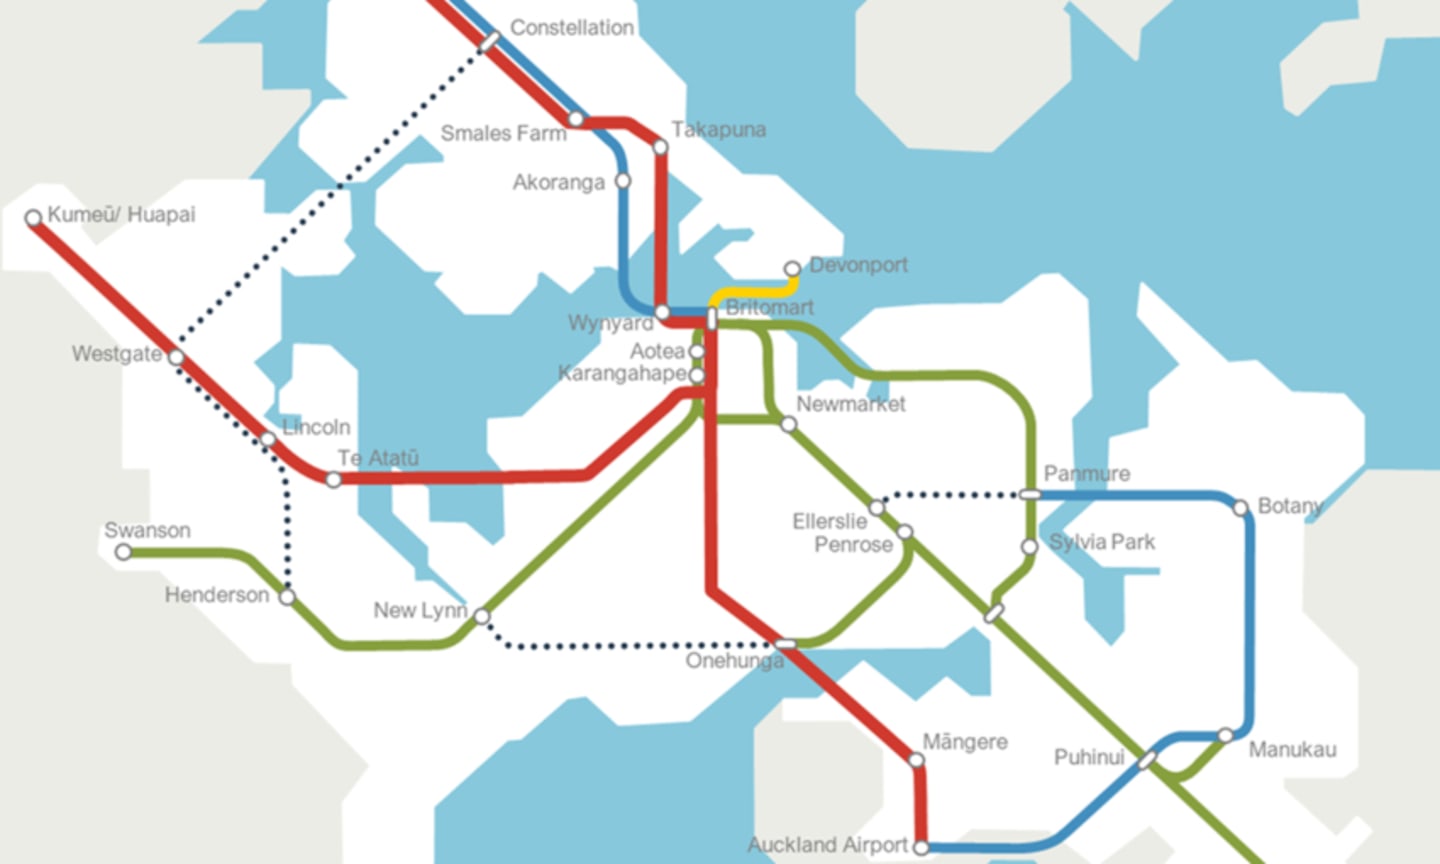 The light rail project is another step towards Auckland having a fully integrated public transport network.